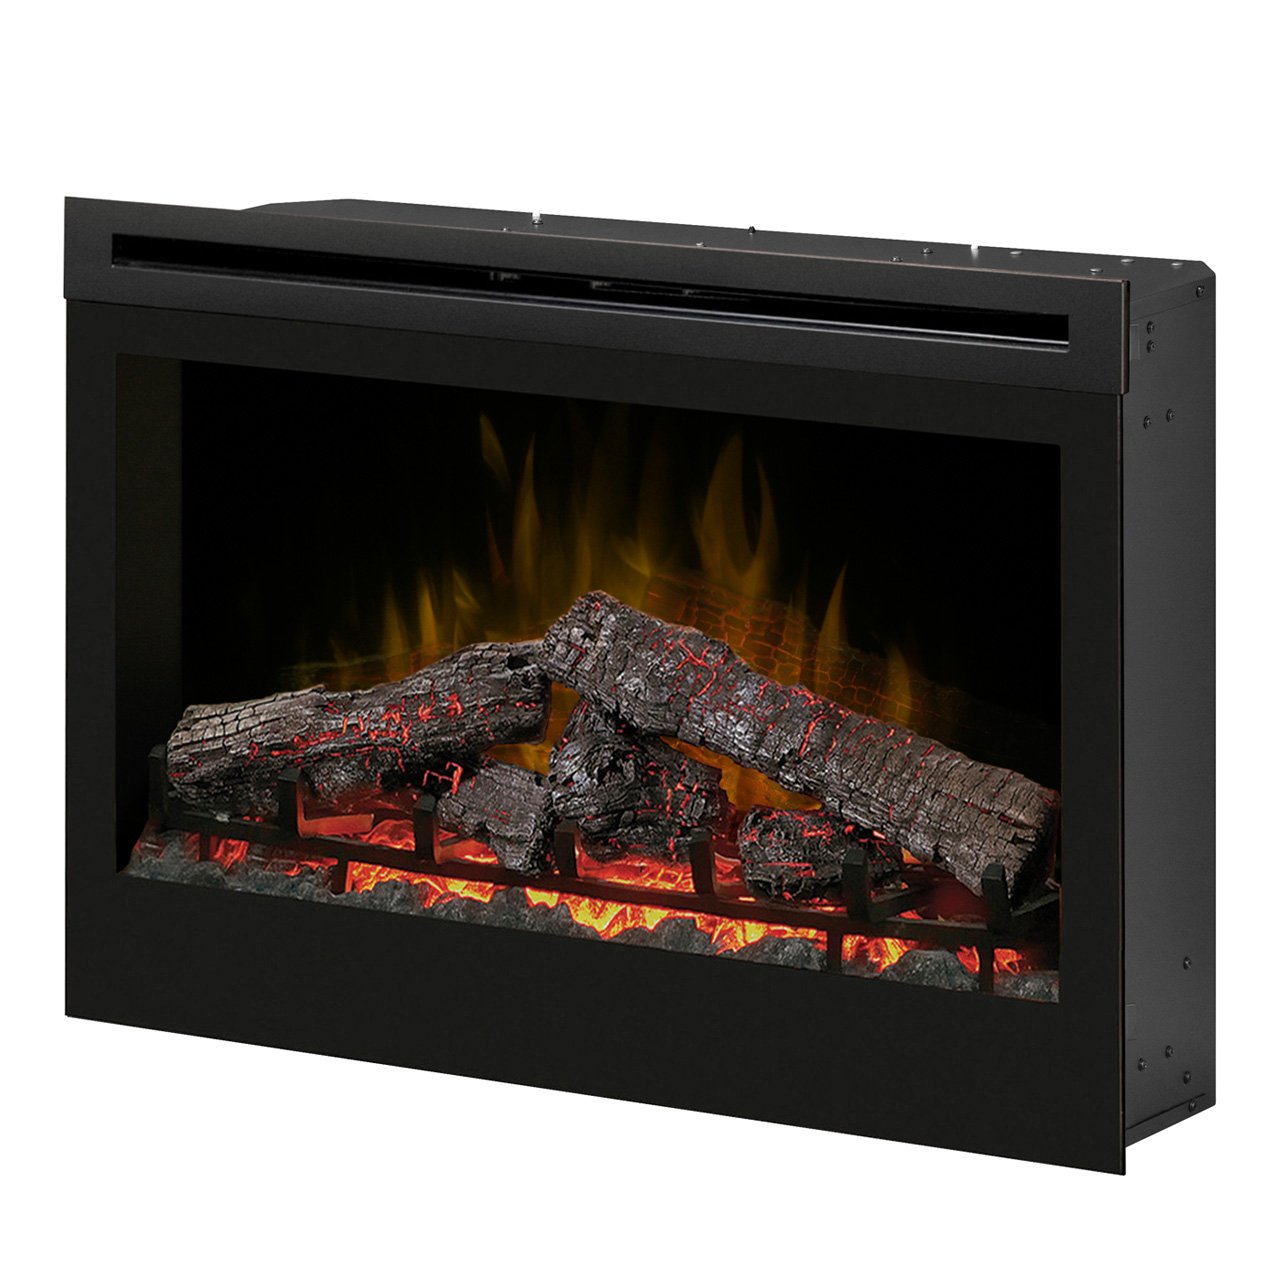 Cheap Fake Fireplace Unique Dimplex Df3033st 33 Inch Self Trimming Electric Fireplace Insert